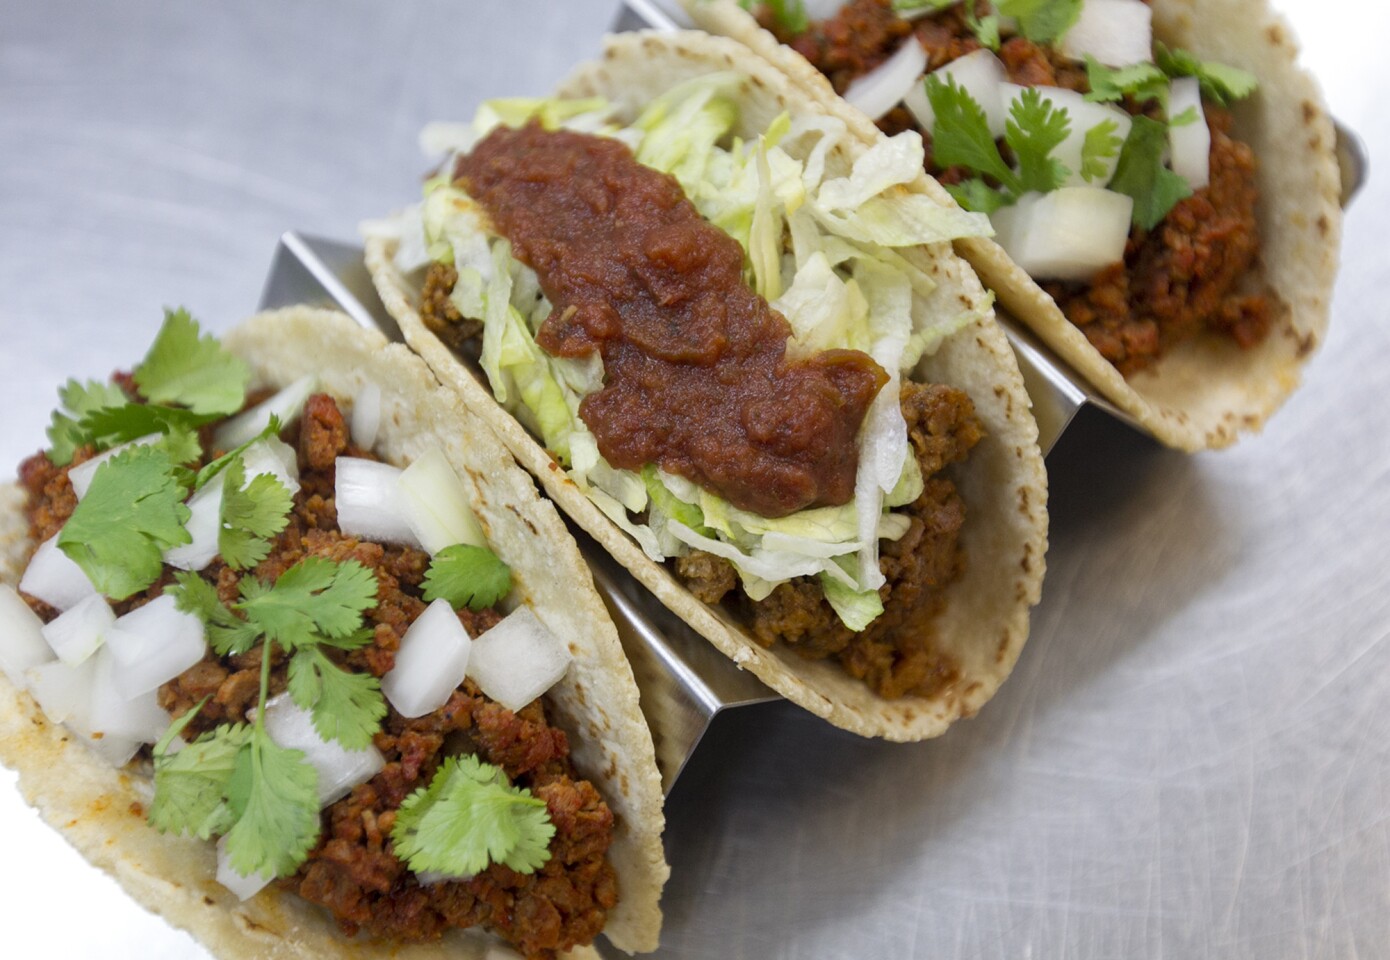 Spanish "chorizo" and ground "beef" tacos are made with plant-based protein from The Abbot's Butcher, a Costa Mesa vegan "meat" company.